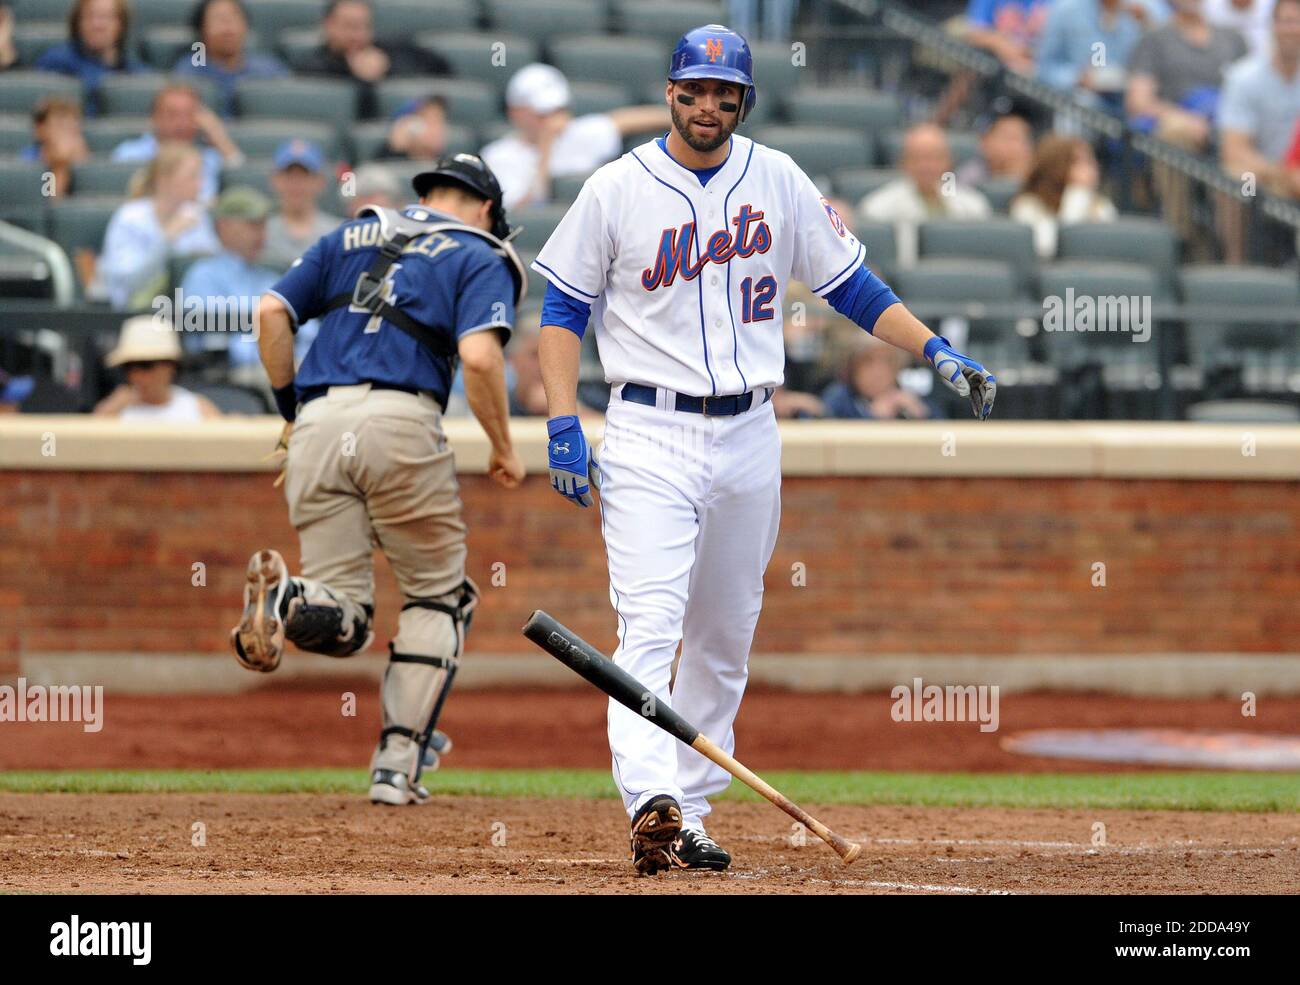 NO FILM, NO VIDEO, NO TV, NO DOCUMENTARY - New York Mets right fielder Jeff Francoeur (12) reacts after striking out to end the bottom of the seventh inning during the MLB Baseball match, New York Mets vs San Diego Padres at CitiField in New York City, USA on June 10, 2010. Photo by Christopher Pasatieri/MCT/ABACAPRESS.COM Stock Photo